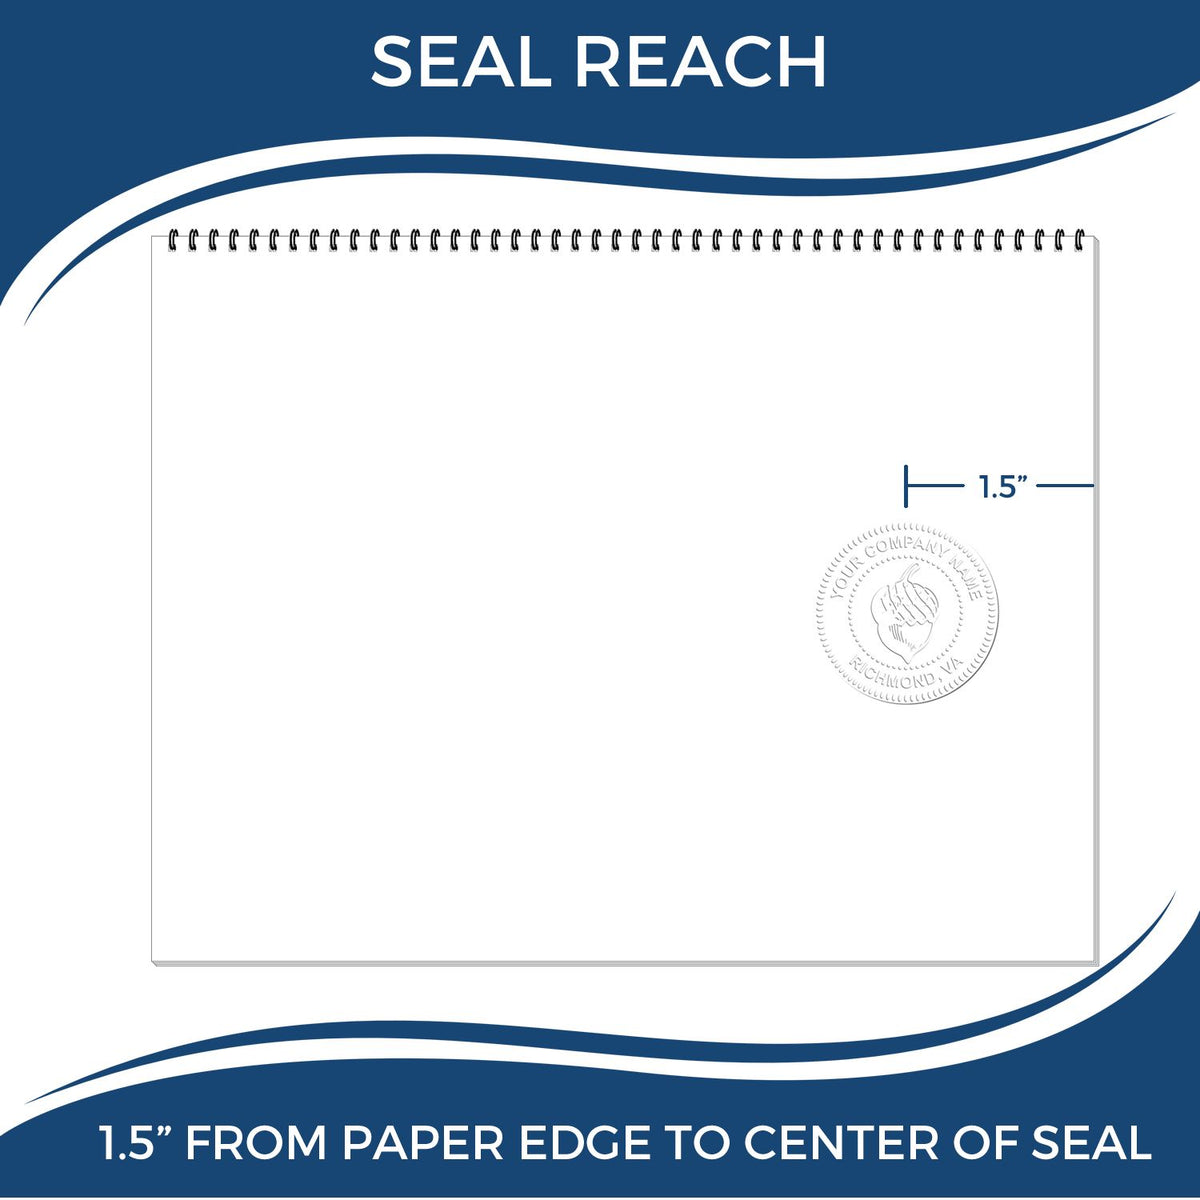 An infographic showing the seal reach which is represented by a ruler and a miniature seal image of the Soft New Hampshire Professional Geologist Seal